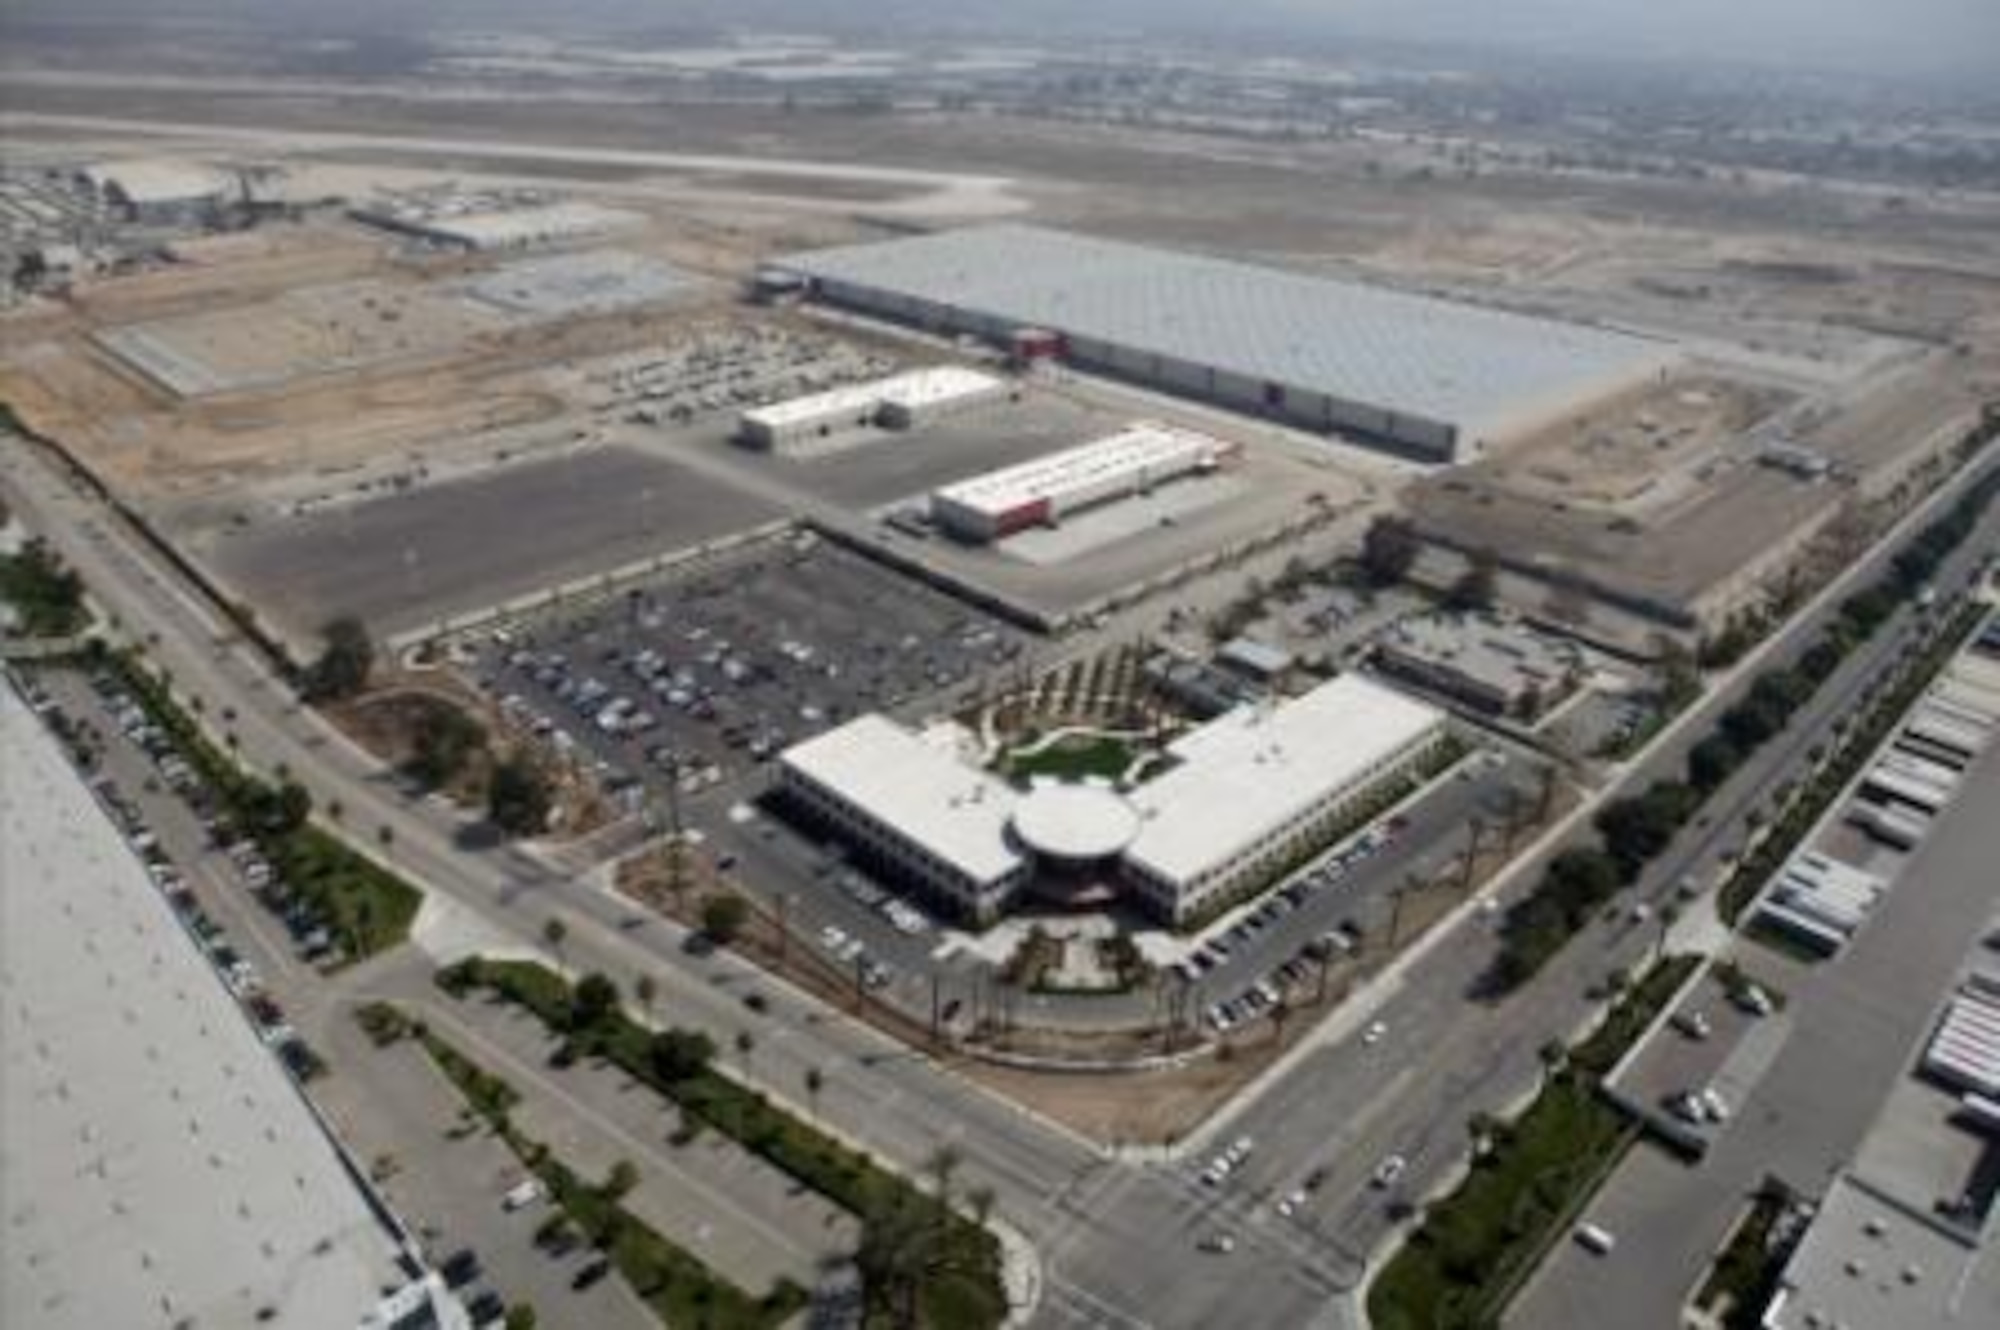 Built on the site of the former Norton Air Force Base headquarters, the Stater Brothers complex is the largest food distribution center in America - 2.1 million square feet under one roof.  Air Force Real Property Agency deeded the property to the Inland Valley Development Agency, which negotiated an agreement with Stater Bros. and master developer, Hillwood.